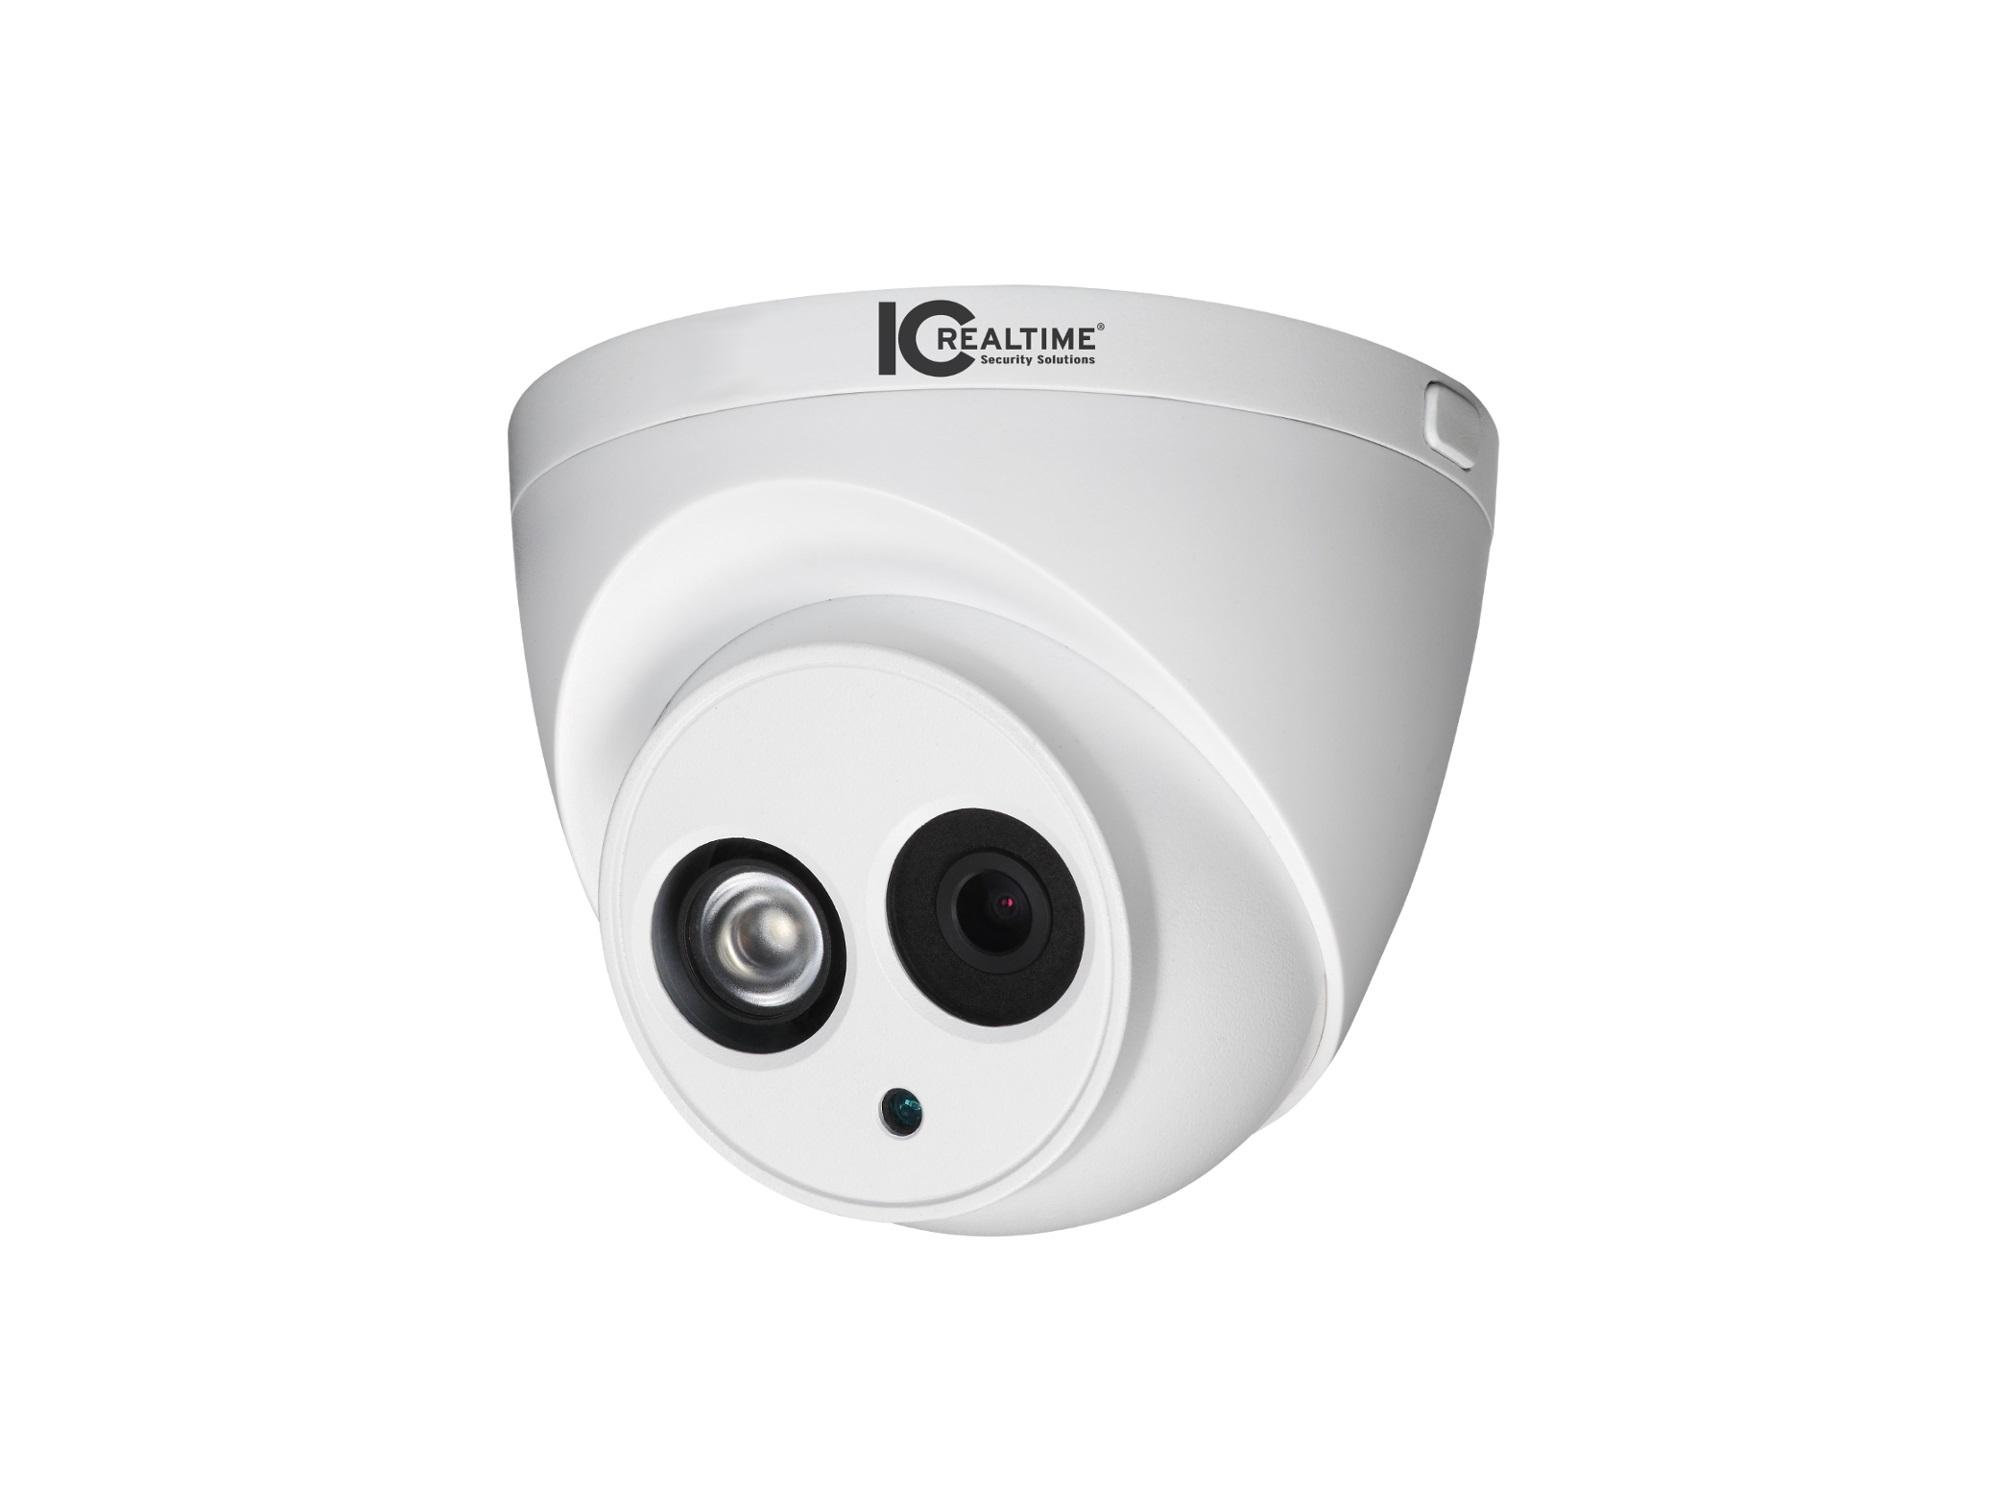 ICR-200HW 2 MP Indoor/Outdoor Mid-Size IR HDAVS Dome Camera/White by ICRealtime